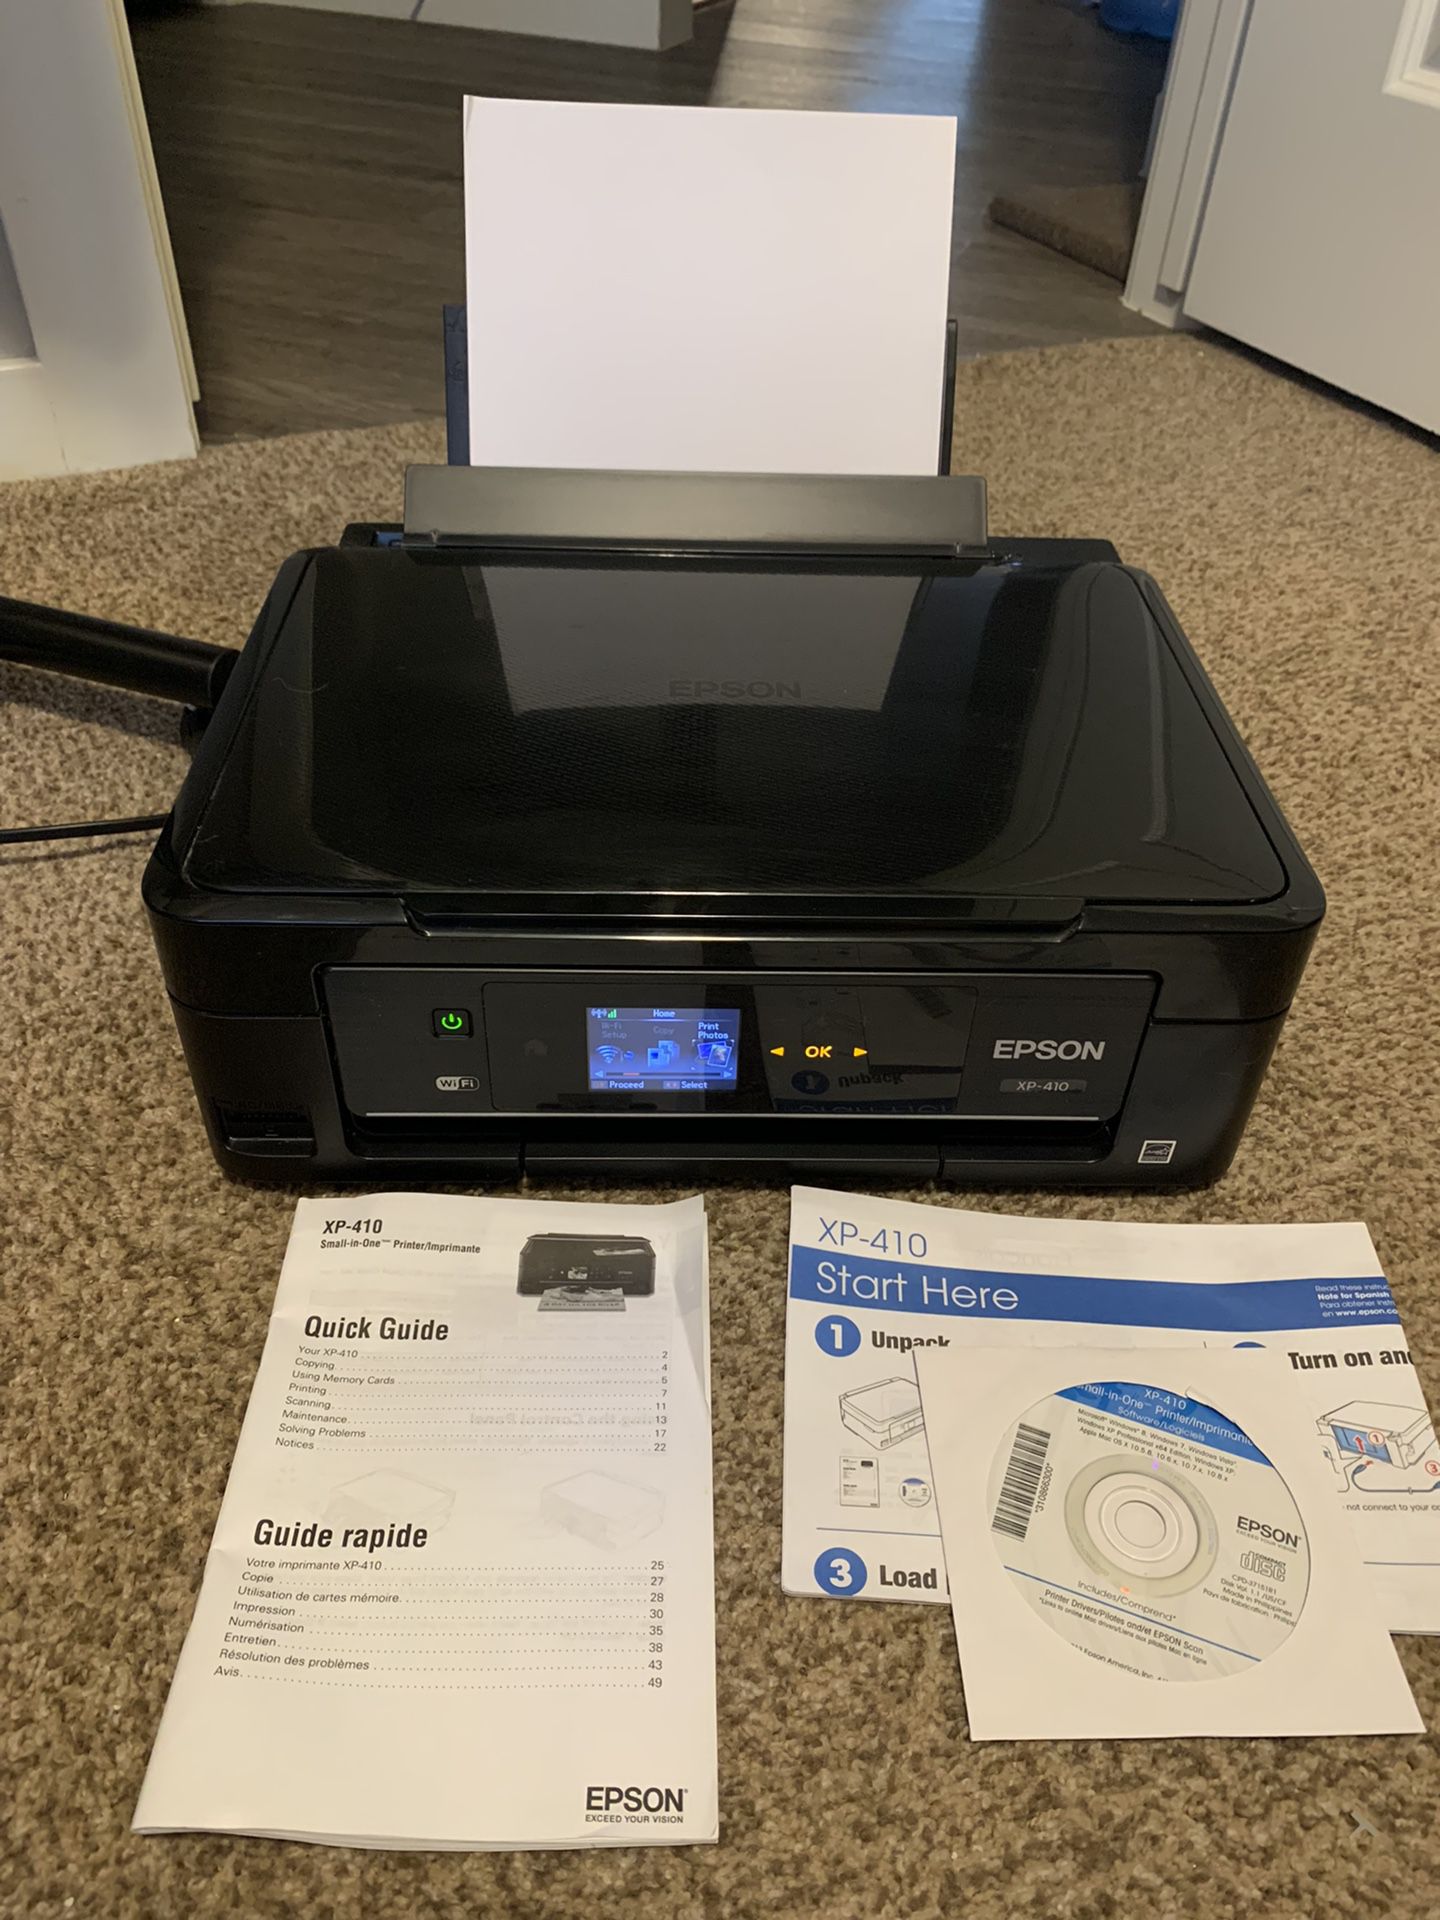 Epson XP-410 Small-In-One Printer